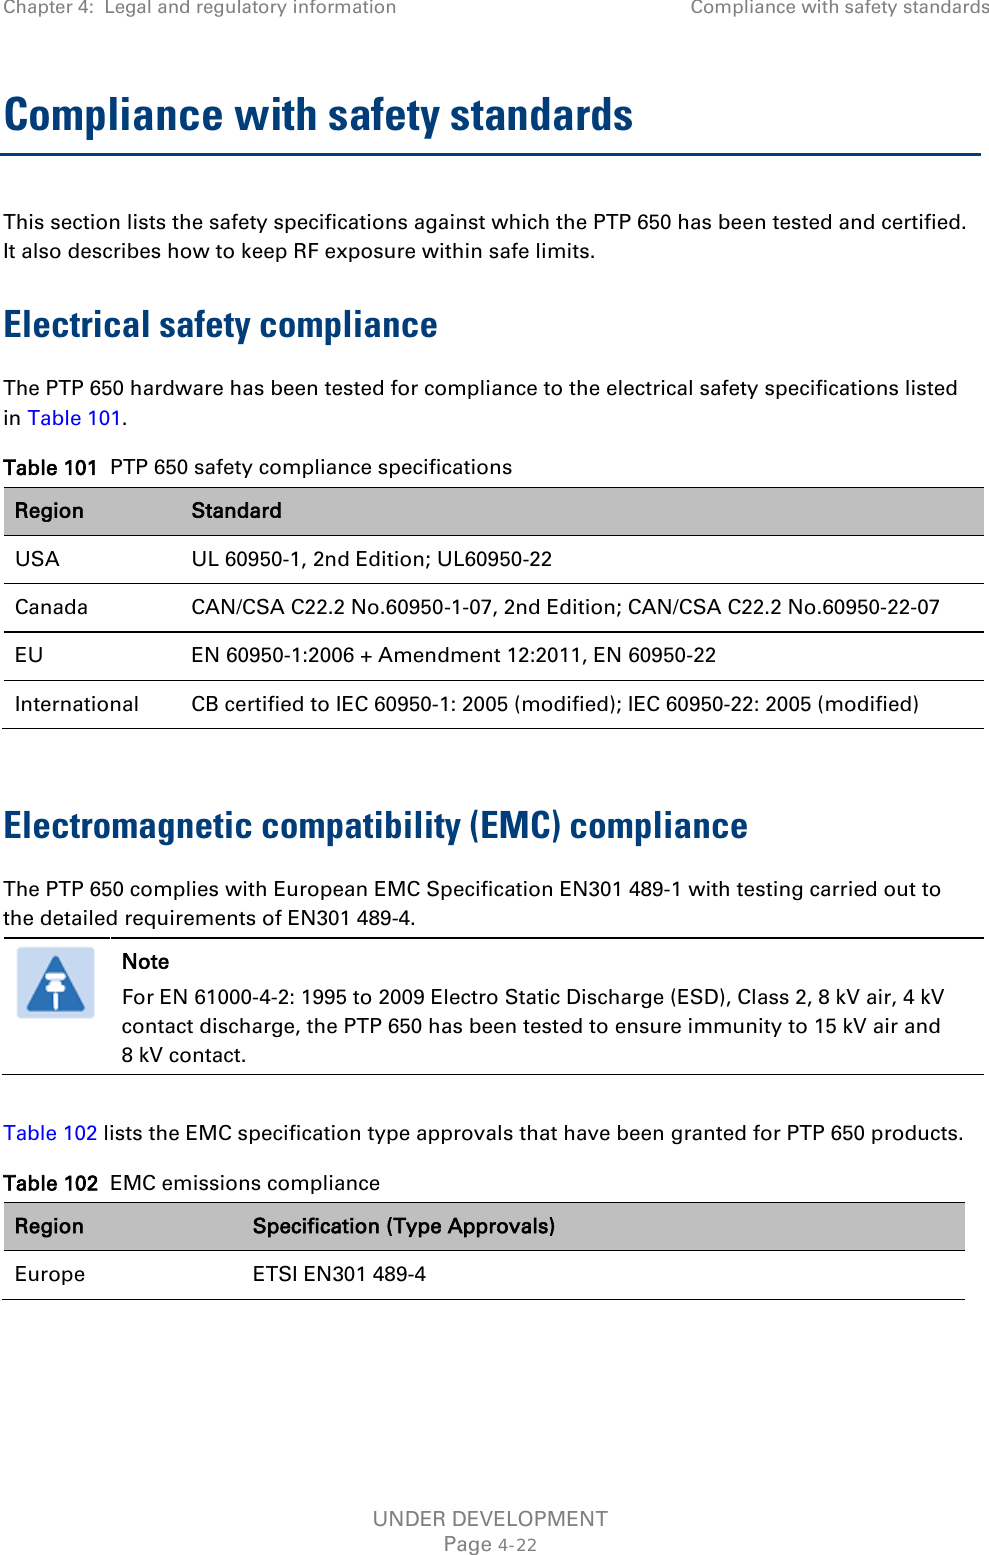 Chapter 4:  Legal and regulatory information Compliance with safety standards  Compliance with safety standards This section lists the safety specifications against which the PTP 650 has been tested and certified. It also describes how to keep RF exposure within safe limits. Electrical safety compliance  The PTP 650 hardware has been tested for compliance to the electrical safety specifications listed in Table 101. Table 101  PTP 650 safety compliance specifications Region Standard USA UL 60950-1, 2nd Edition; UL60950-22 Canada CAN/CSA C22.2 No.60950-1-07, 2nd Edition; CAN/CSA C22.2 No.60950-22-07 EU EN 60950-1:2006 + Amendment 12:2011, EN 60950-22 International CB certified to IEC 60950-1: 2005 (modified); IEC 60950-22: 2005 (modified)  Electromagnetic compatibility (EMC) compliance The PTP 650 complies with European EMC Specification EN301 489-1 with testing carried out to the detailed requirements of EN301 489-4.   Note For EN 61000-4-2: 1995 to 2009 Electro Static Discharge (ESD), Class 2, 8 kV air, 4 kV contact discharge, the PTP 650 has been tested to ensure immunity to 15 kV air and 8 kV contact.  Table 102 lists the EMC specification type approvals that have been granted for PTP 650 products. Table 102  EMC emissions compliance Region Specification (Type Approvals) Europe ETSI EN301 489-4  UNDER DEVELOPMENT Page 4-22 